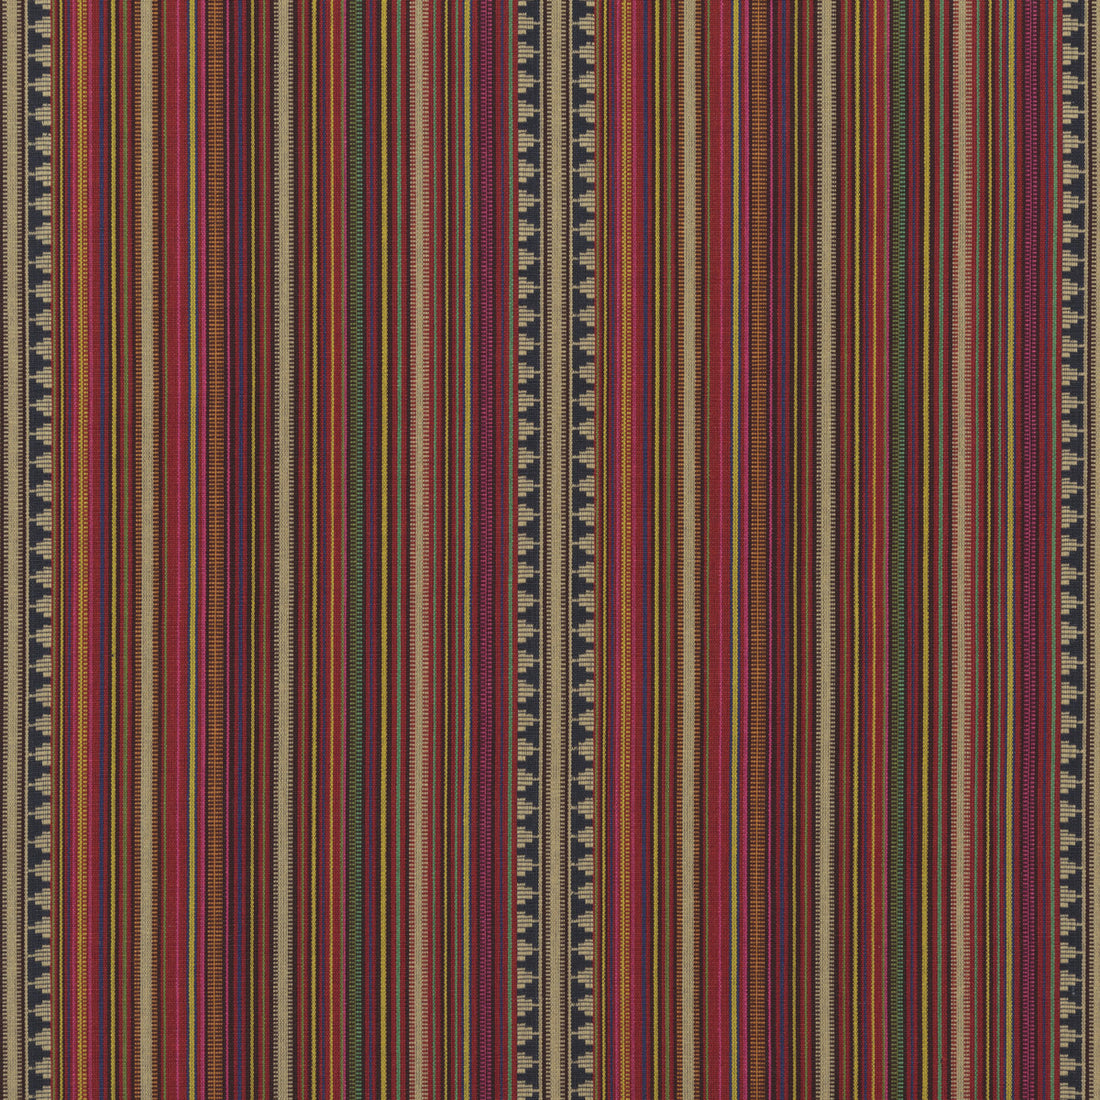 Pageant Stripe fabric in multi color - pattern FD756.Y101.0 - by Mulberry in the Festival collection